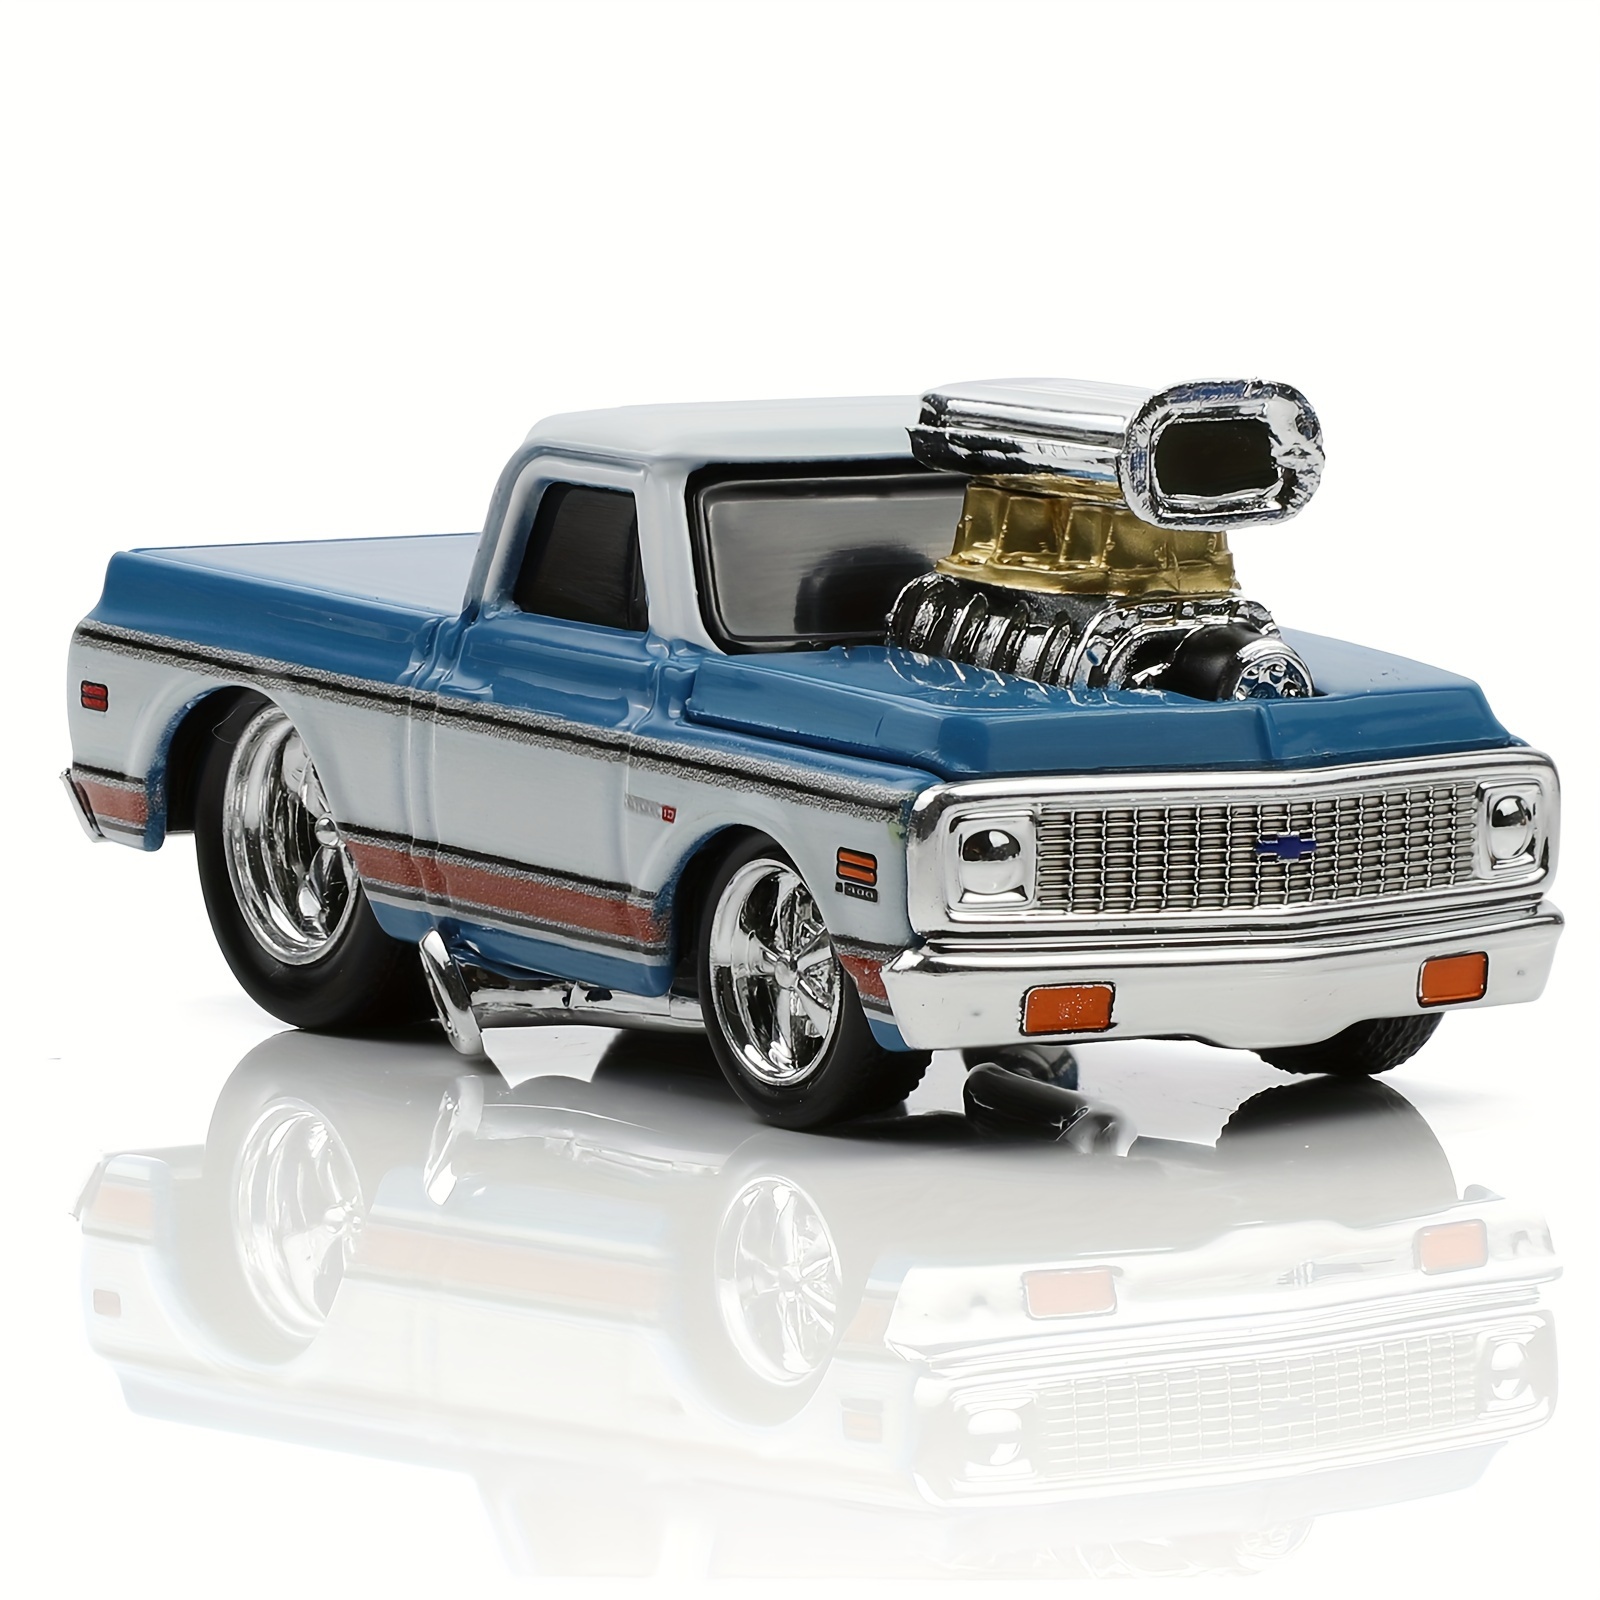 

Maisto Scale Miniature 1972 C10 Pickup - Metal Collectible Car Toy For Youngsters Aged 3-6